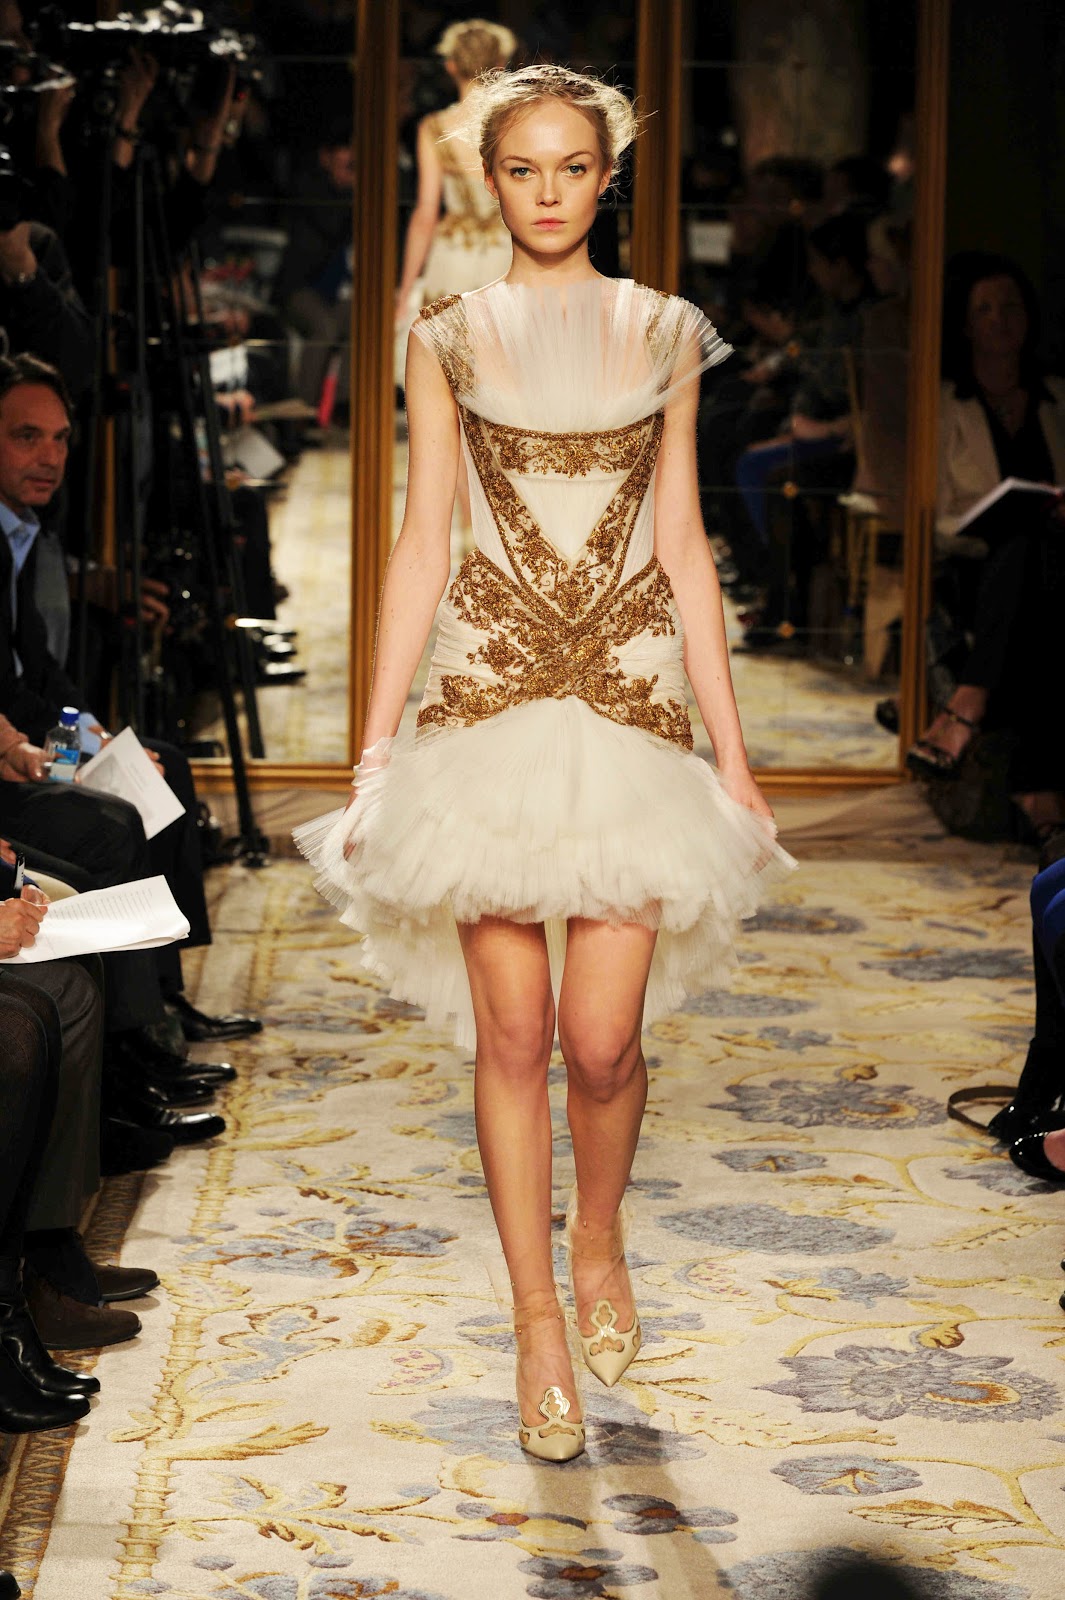 AMORE (Beauty + Fashion): Wedding Bell Wednesday - Marchesa AW11/12